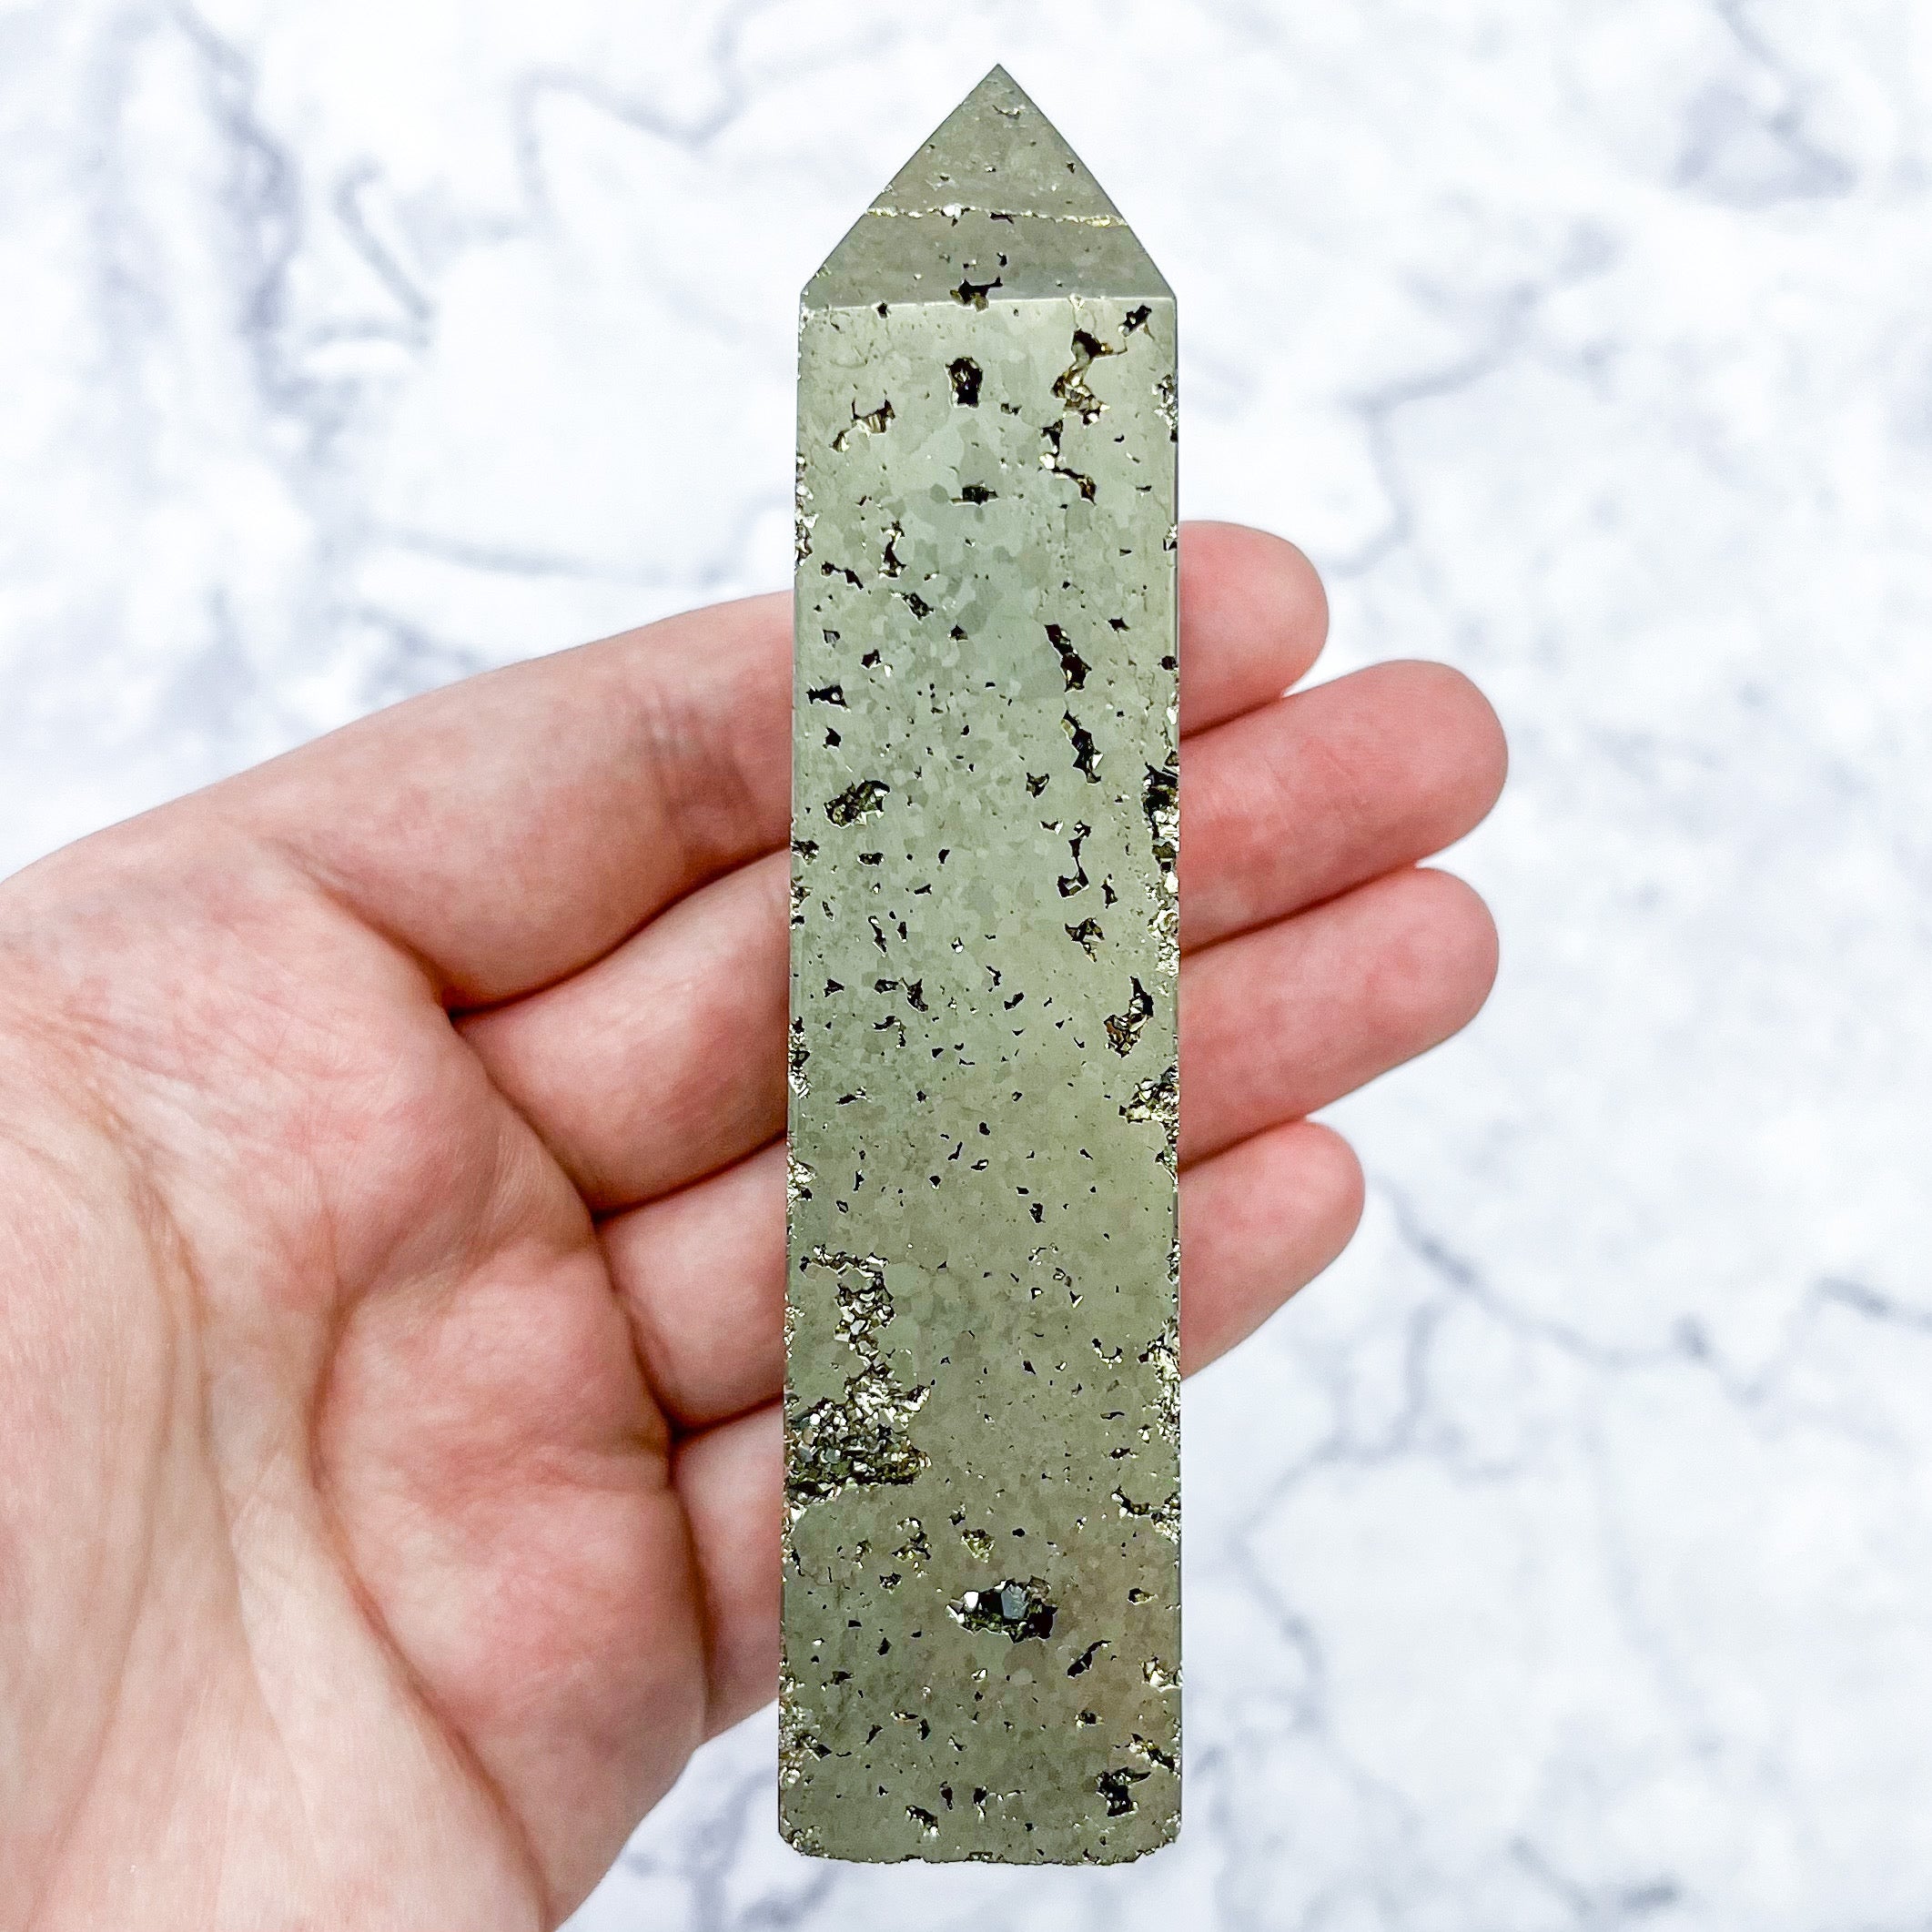 4 Inch Pyrite Tower M86